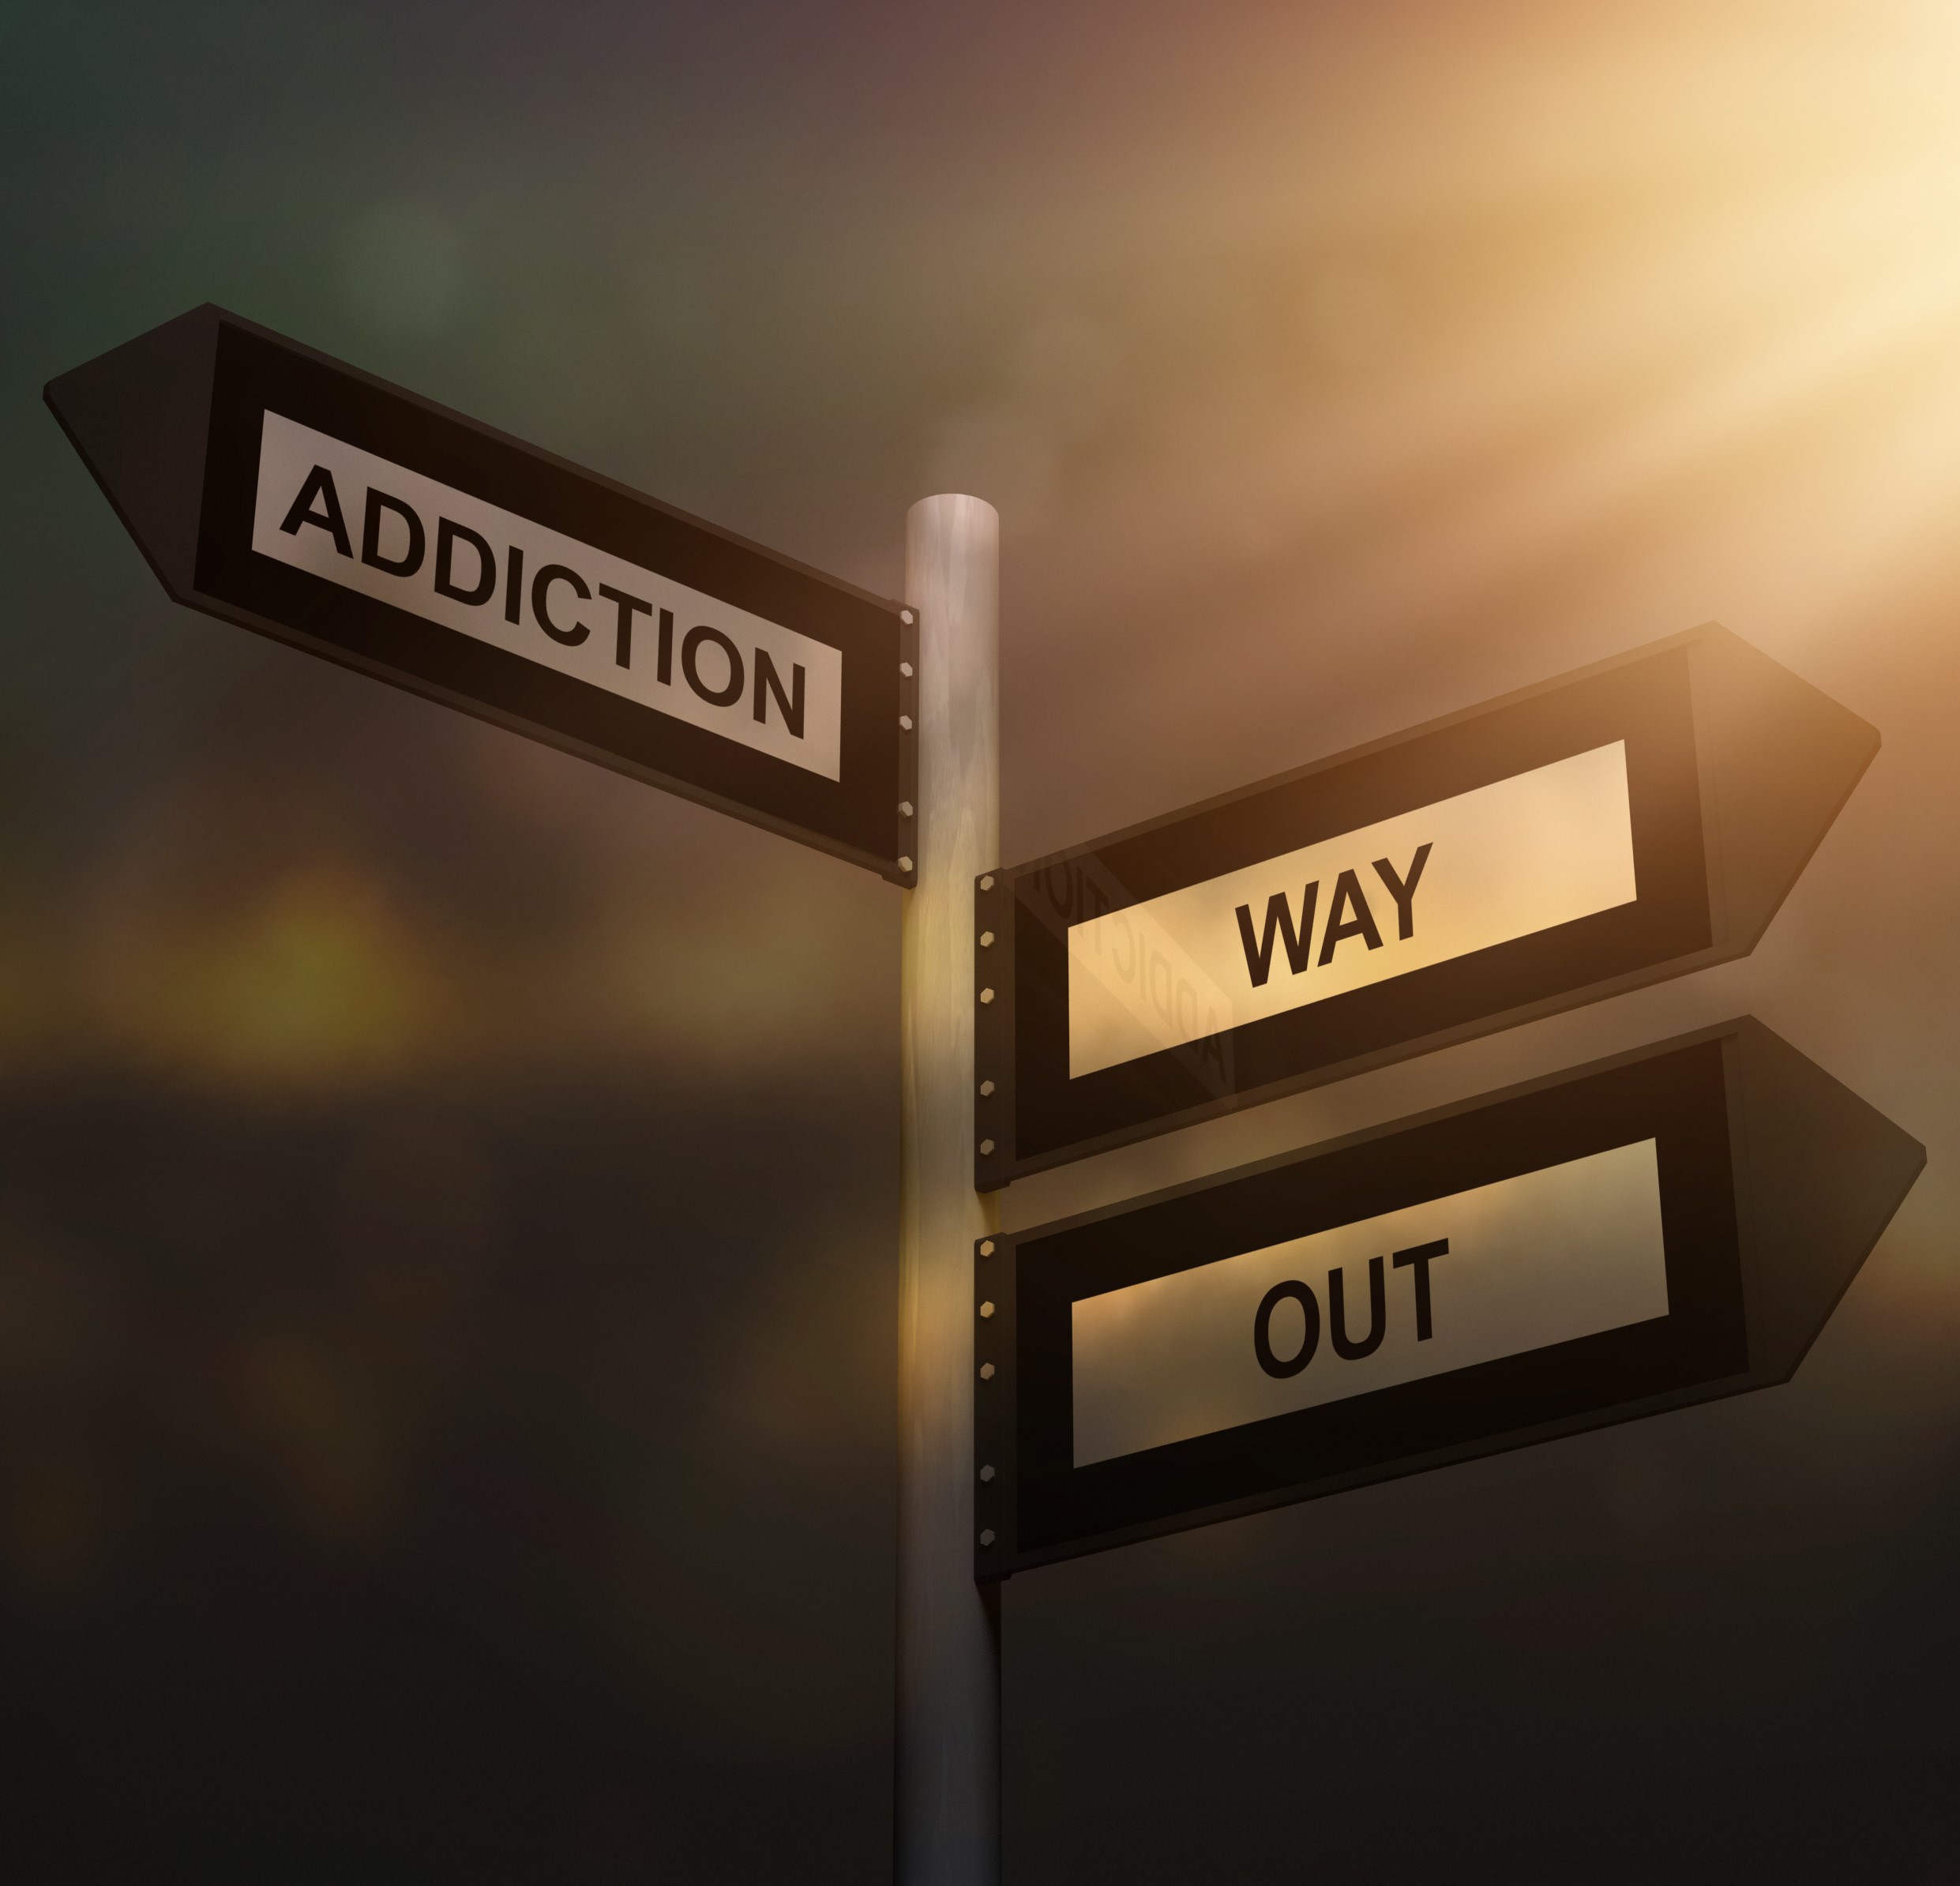 Addiction-Counseling-For-A-Way-Out-In-Greensboro-North-Carolina